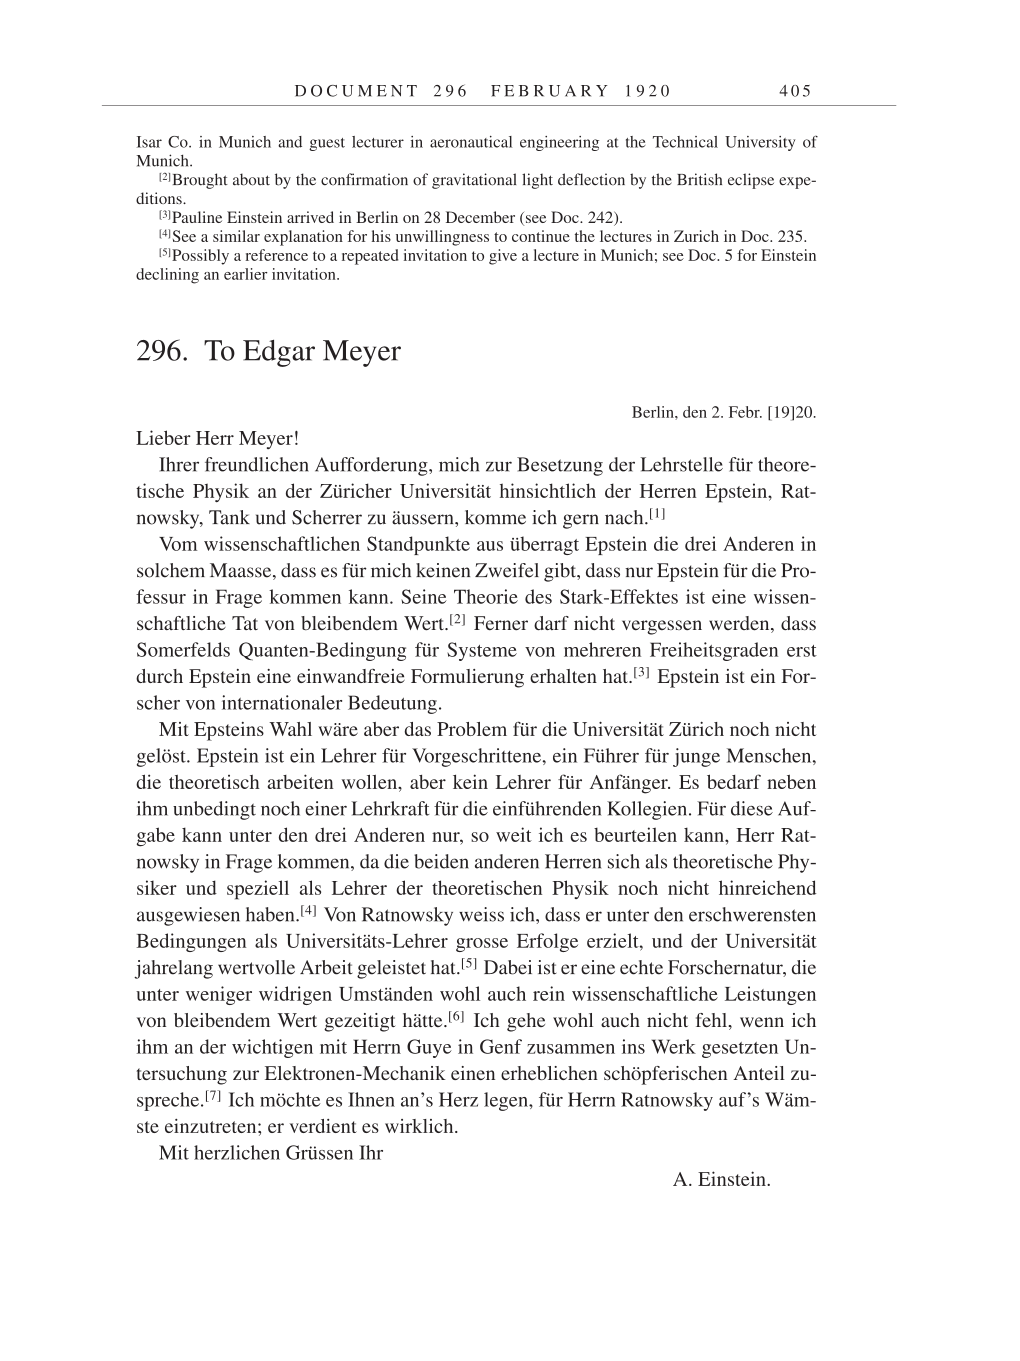 Volume 9: The Berlin Years: Correspondence January 1919-April 1920 page 405